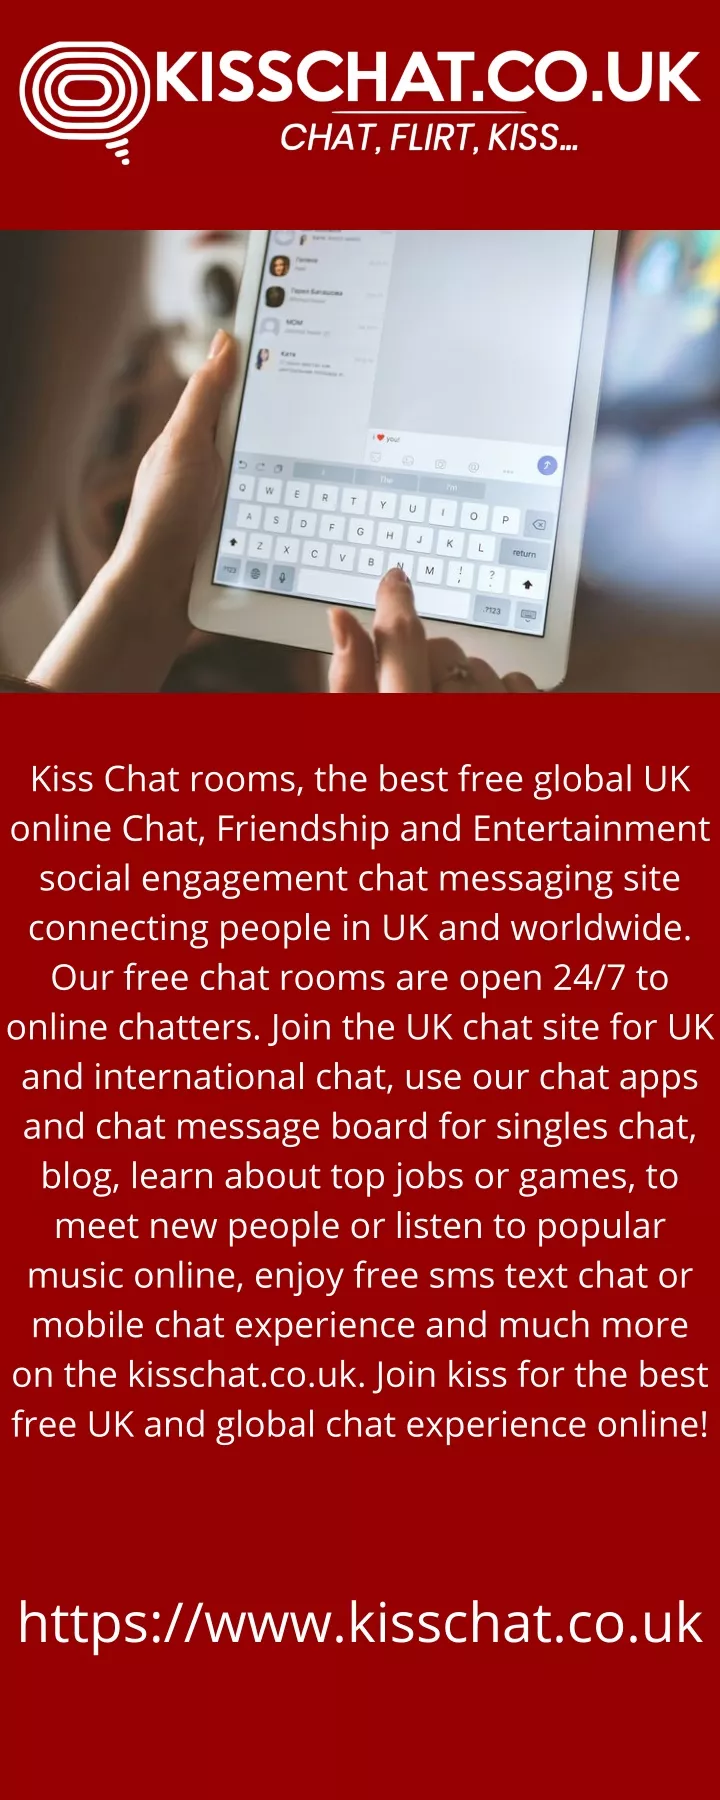 kiss chat rooms the best free global uk online